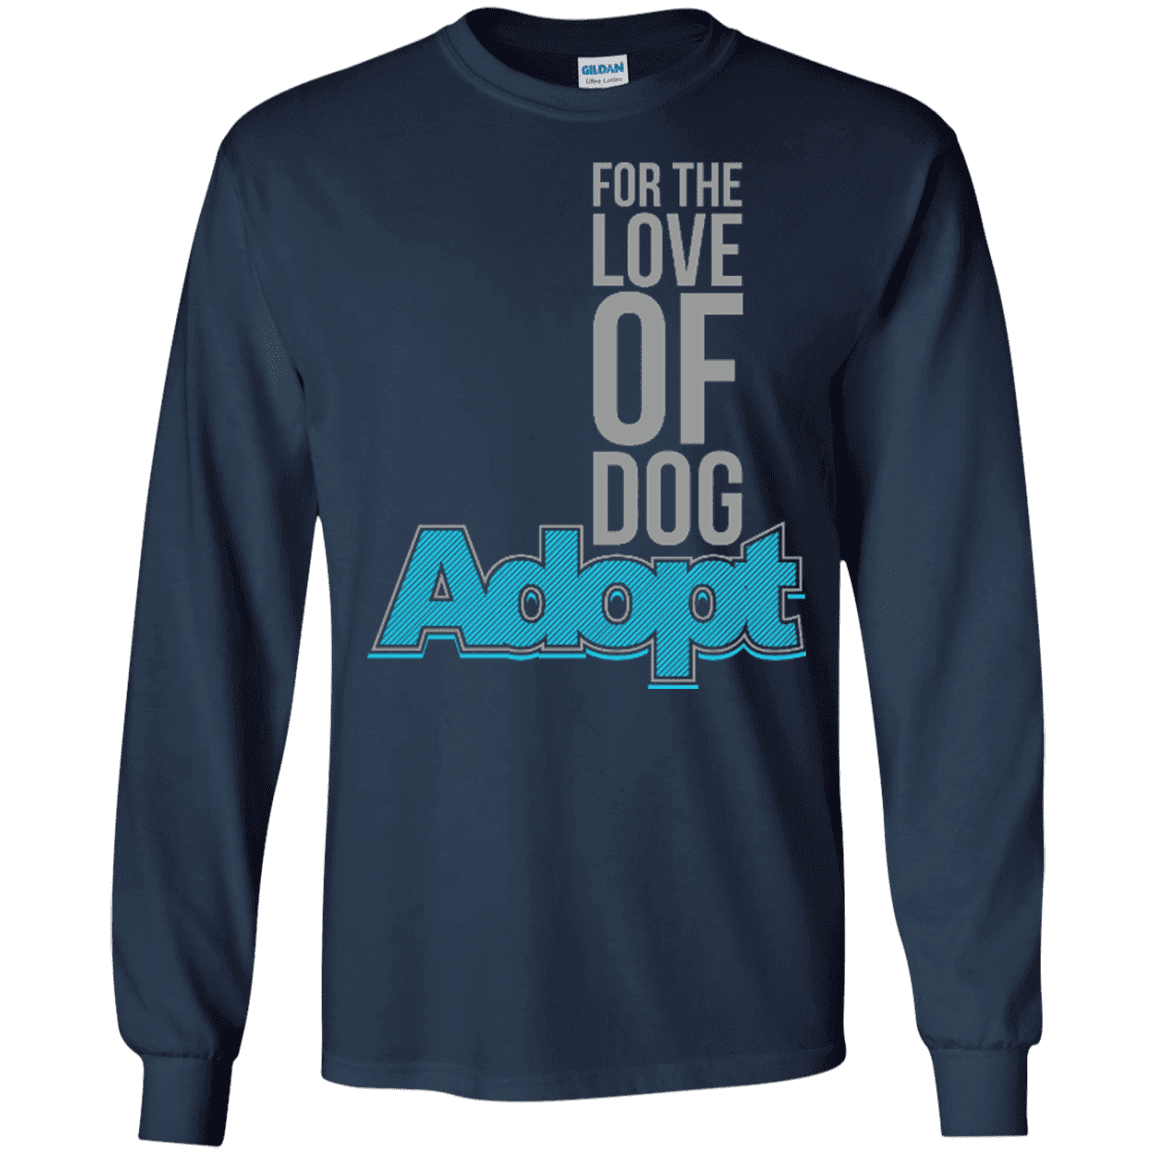 For The Love Of Dog Adopt - Long Sleeve T Shirt.